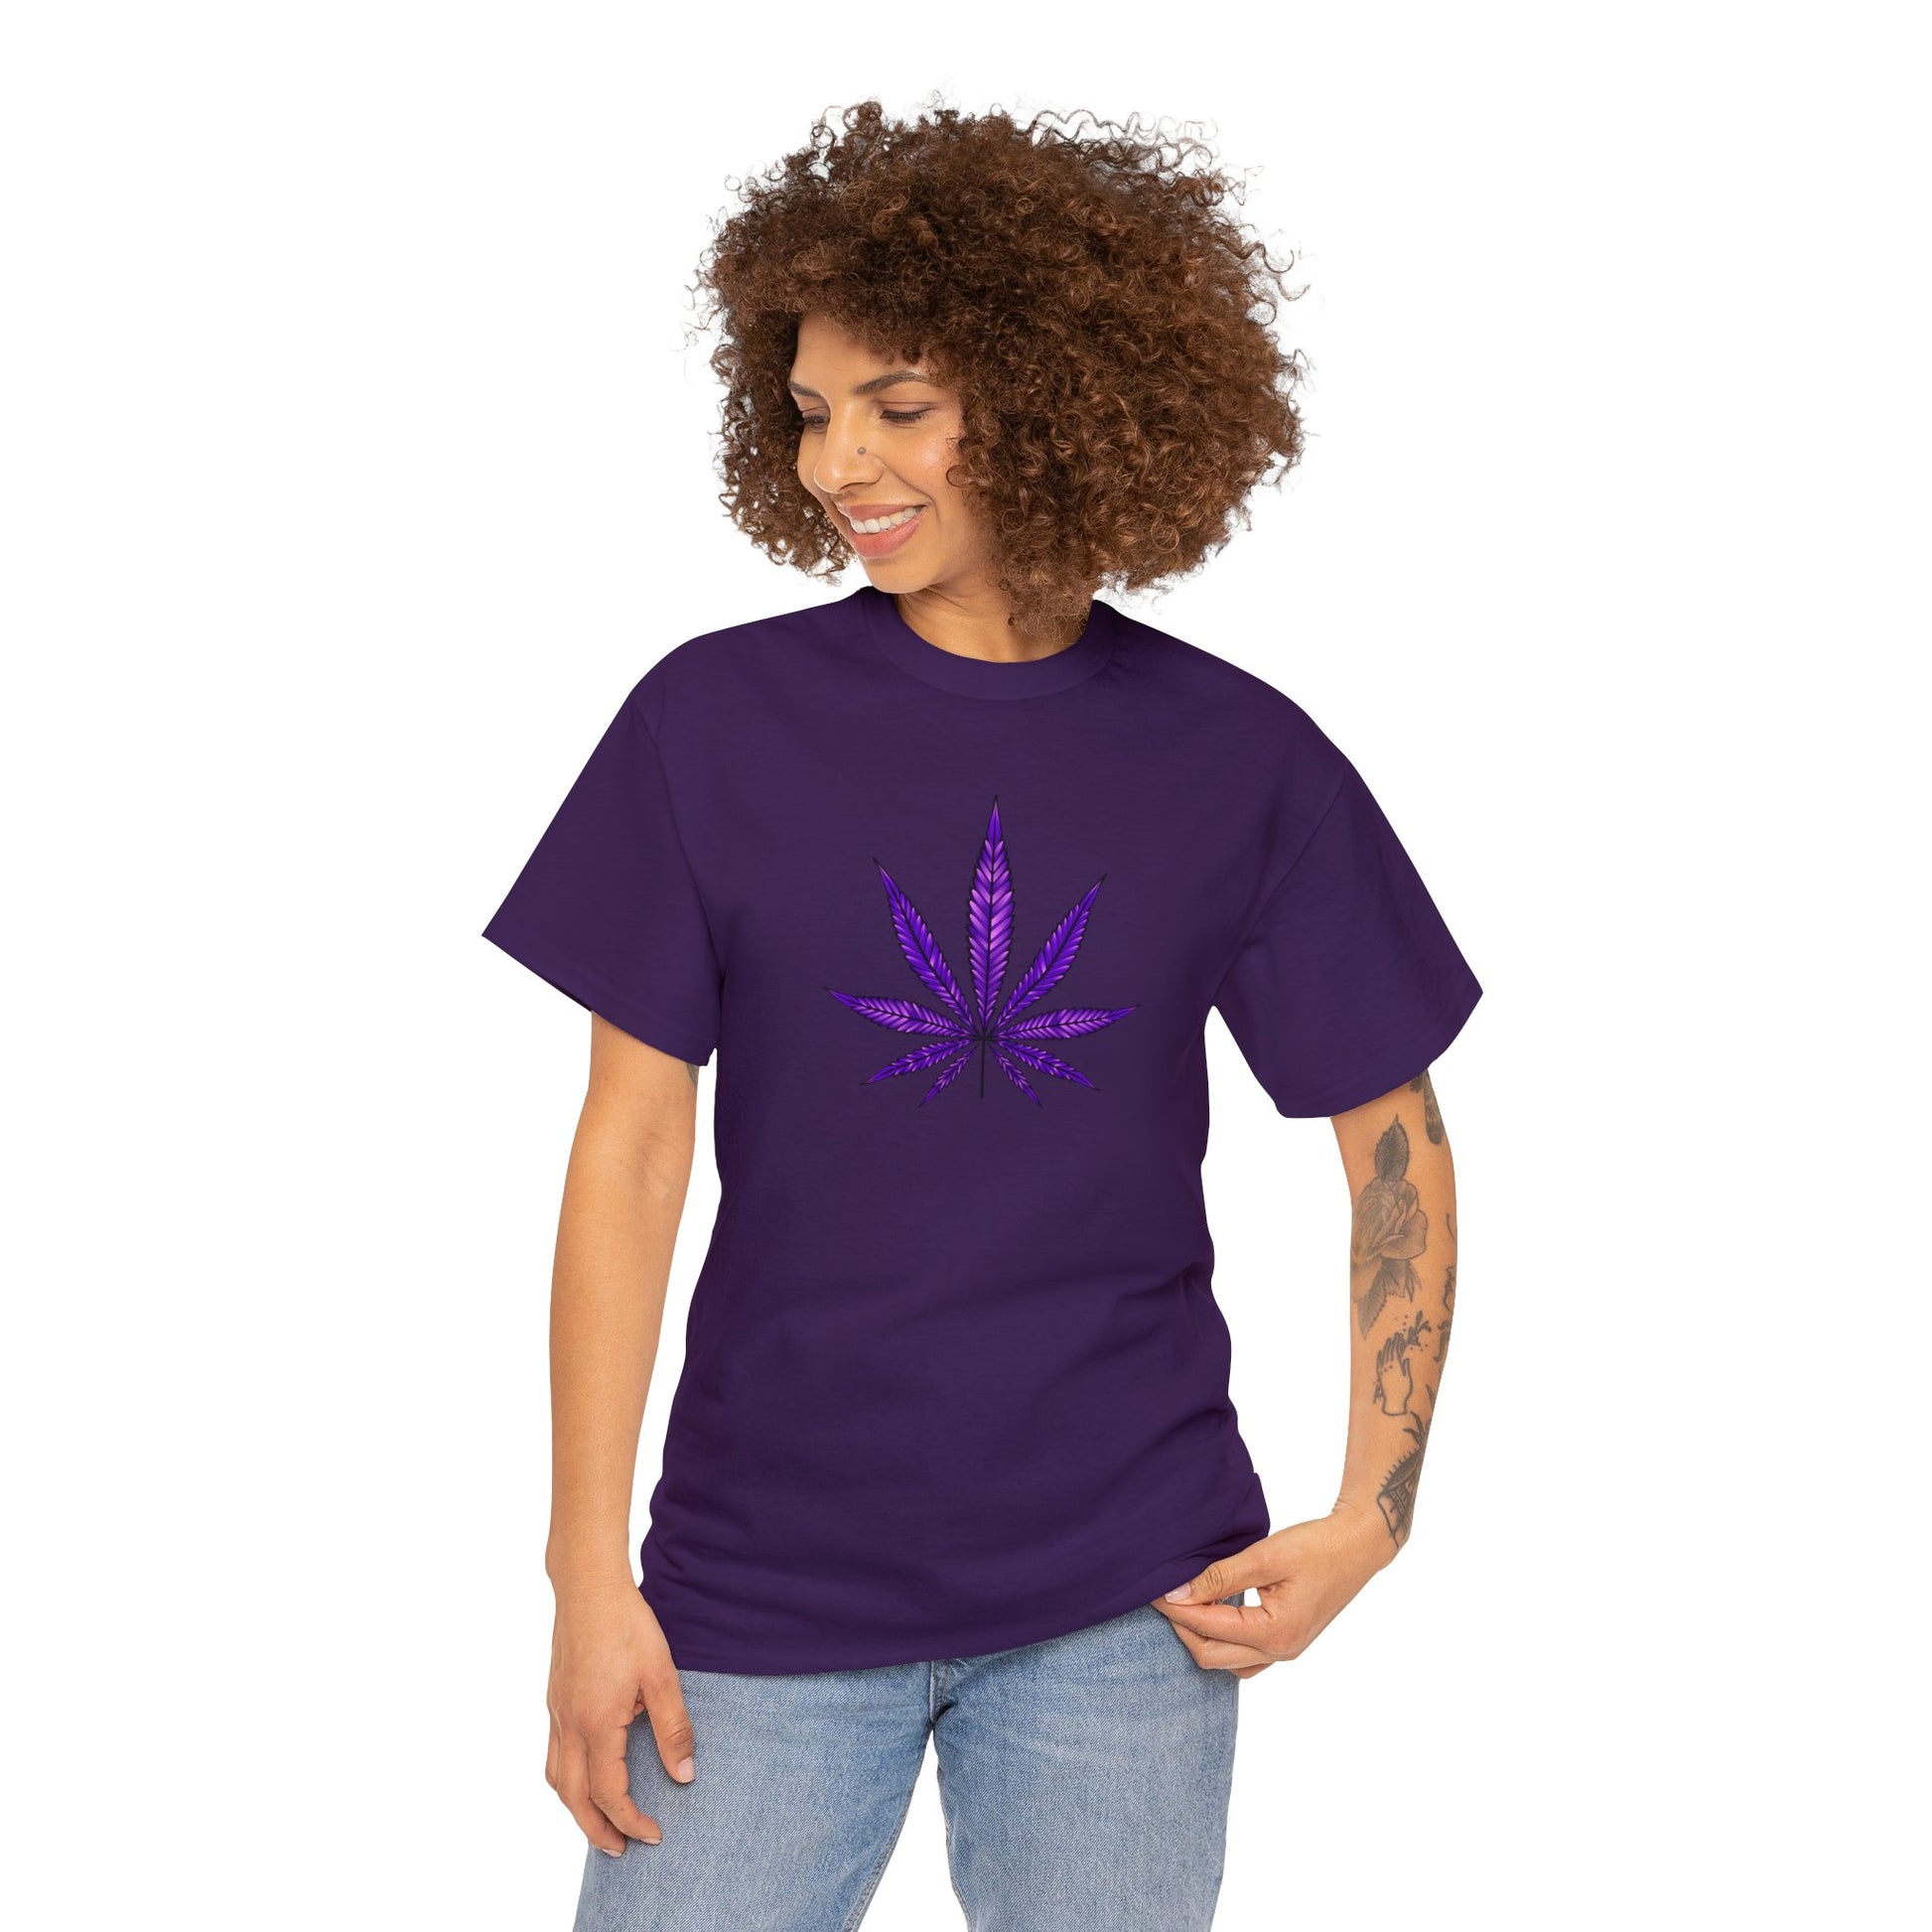 A person wearing a Sparkling Weed Leaf Tee with a graphic of a sparkling marijuana leaf design on the front.